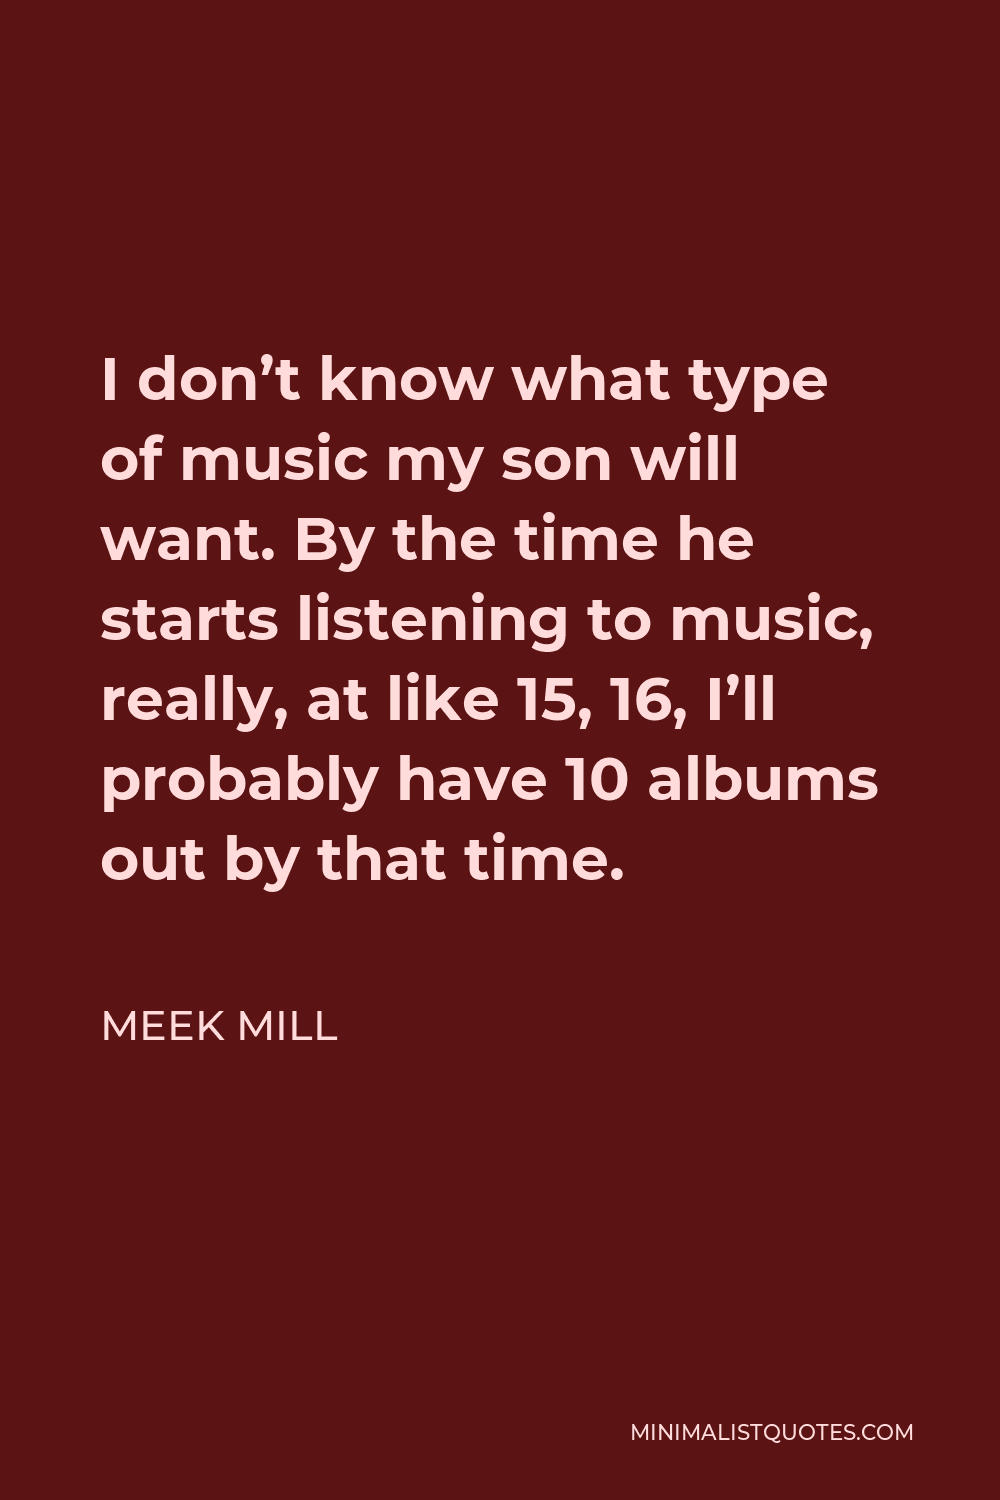 Meek Mill Quote - I don’t know what type of music my son will want. By the time he starts listening to music, really, at like 15, 16, I’ll probably have 10 albums out by that time.